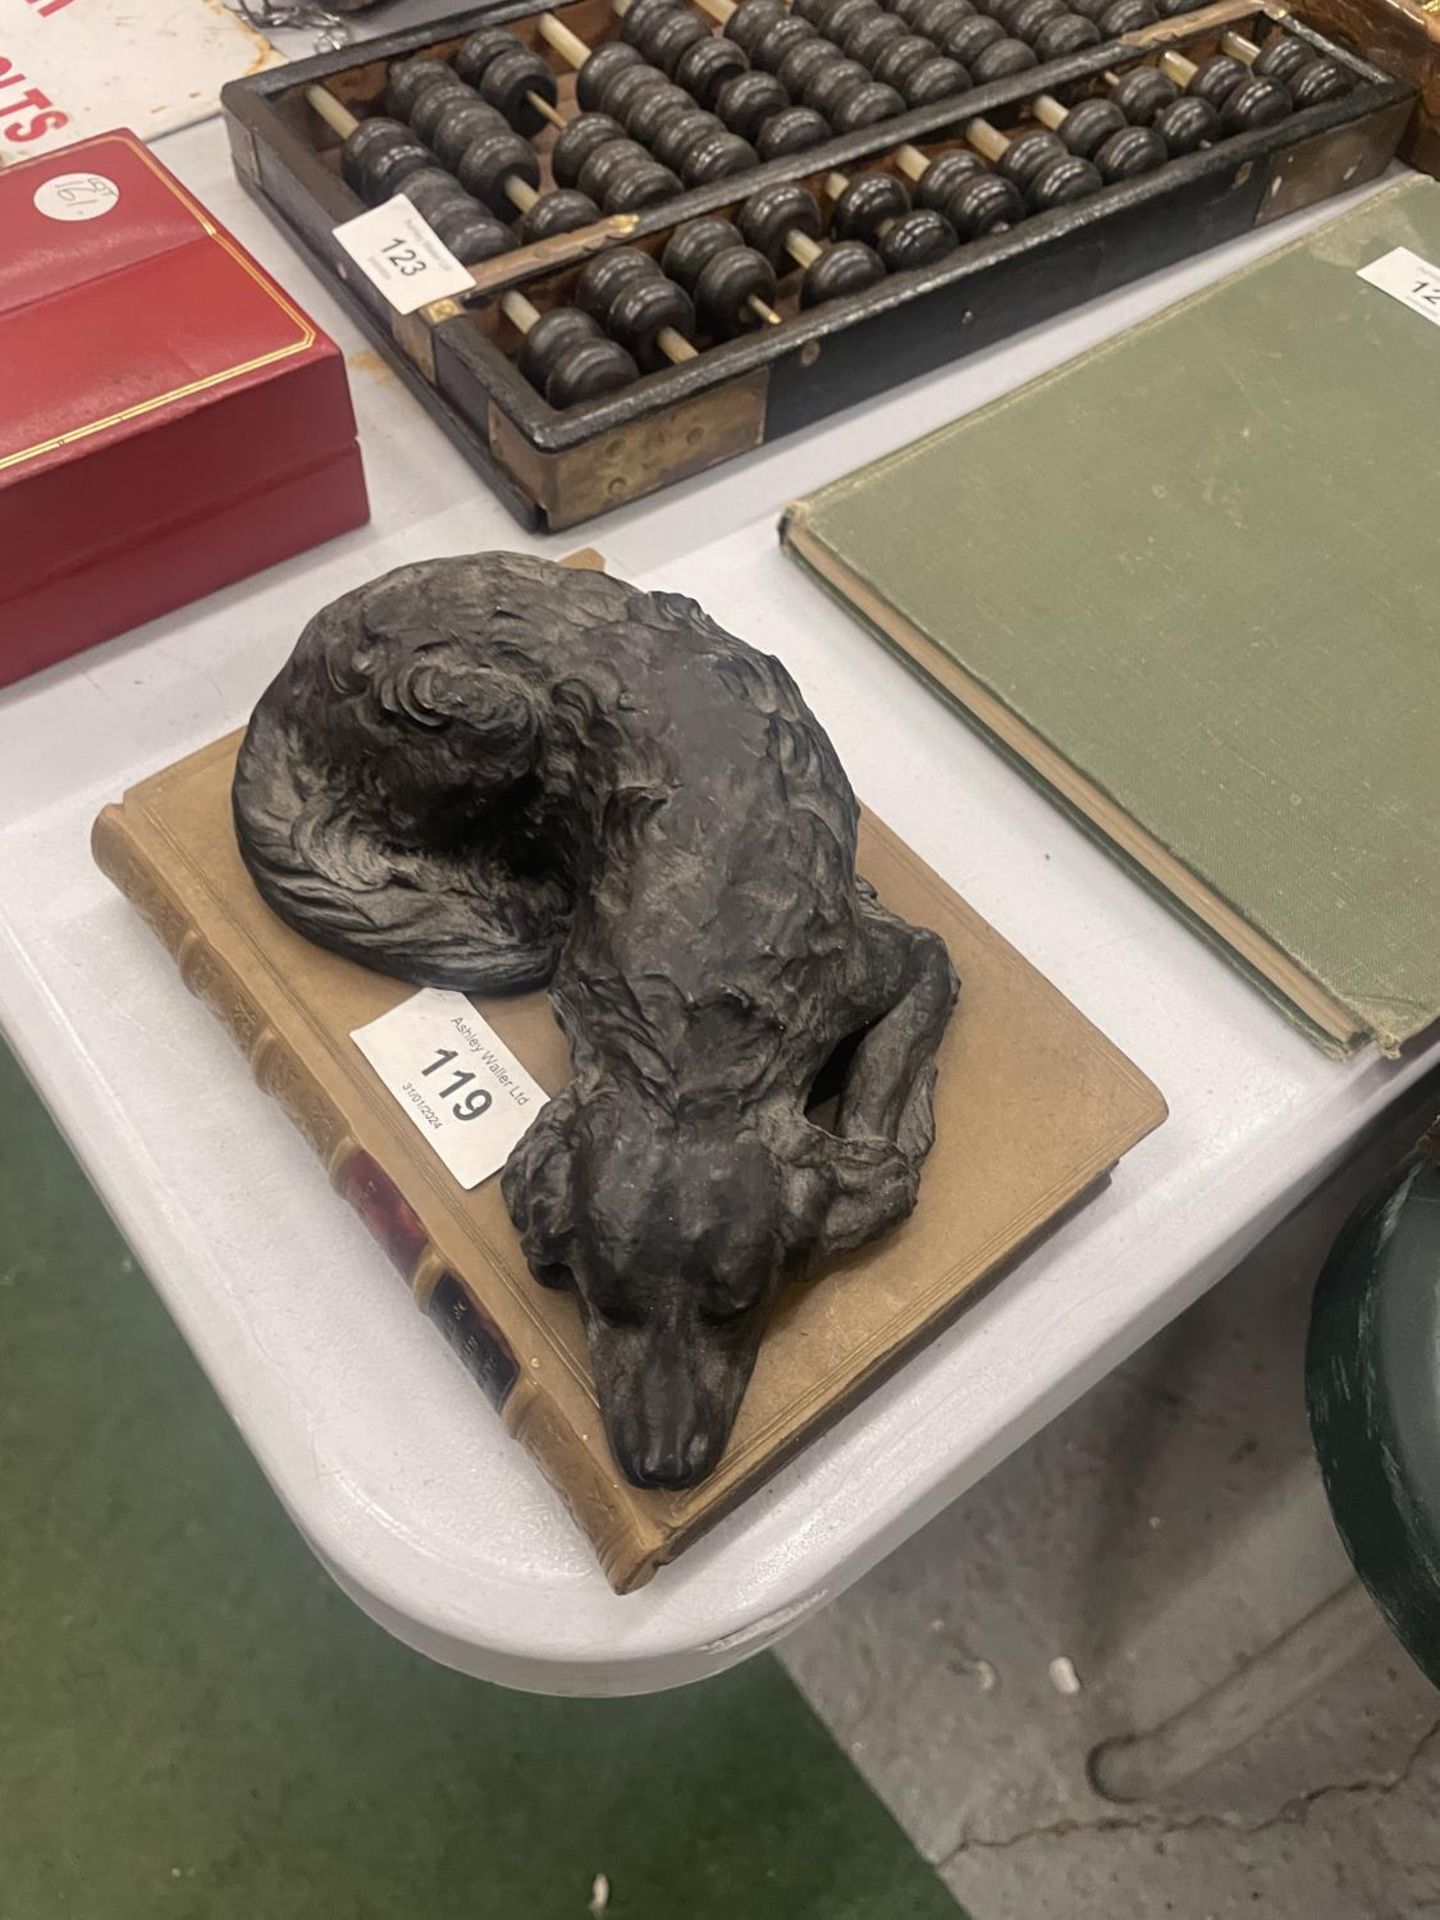 A HEAVY MODEL OF A SLEEPING DOG ON A STONEWARE BOOK, LENGTH 18CM, HEIGHT 7CM